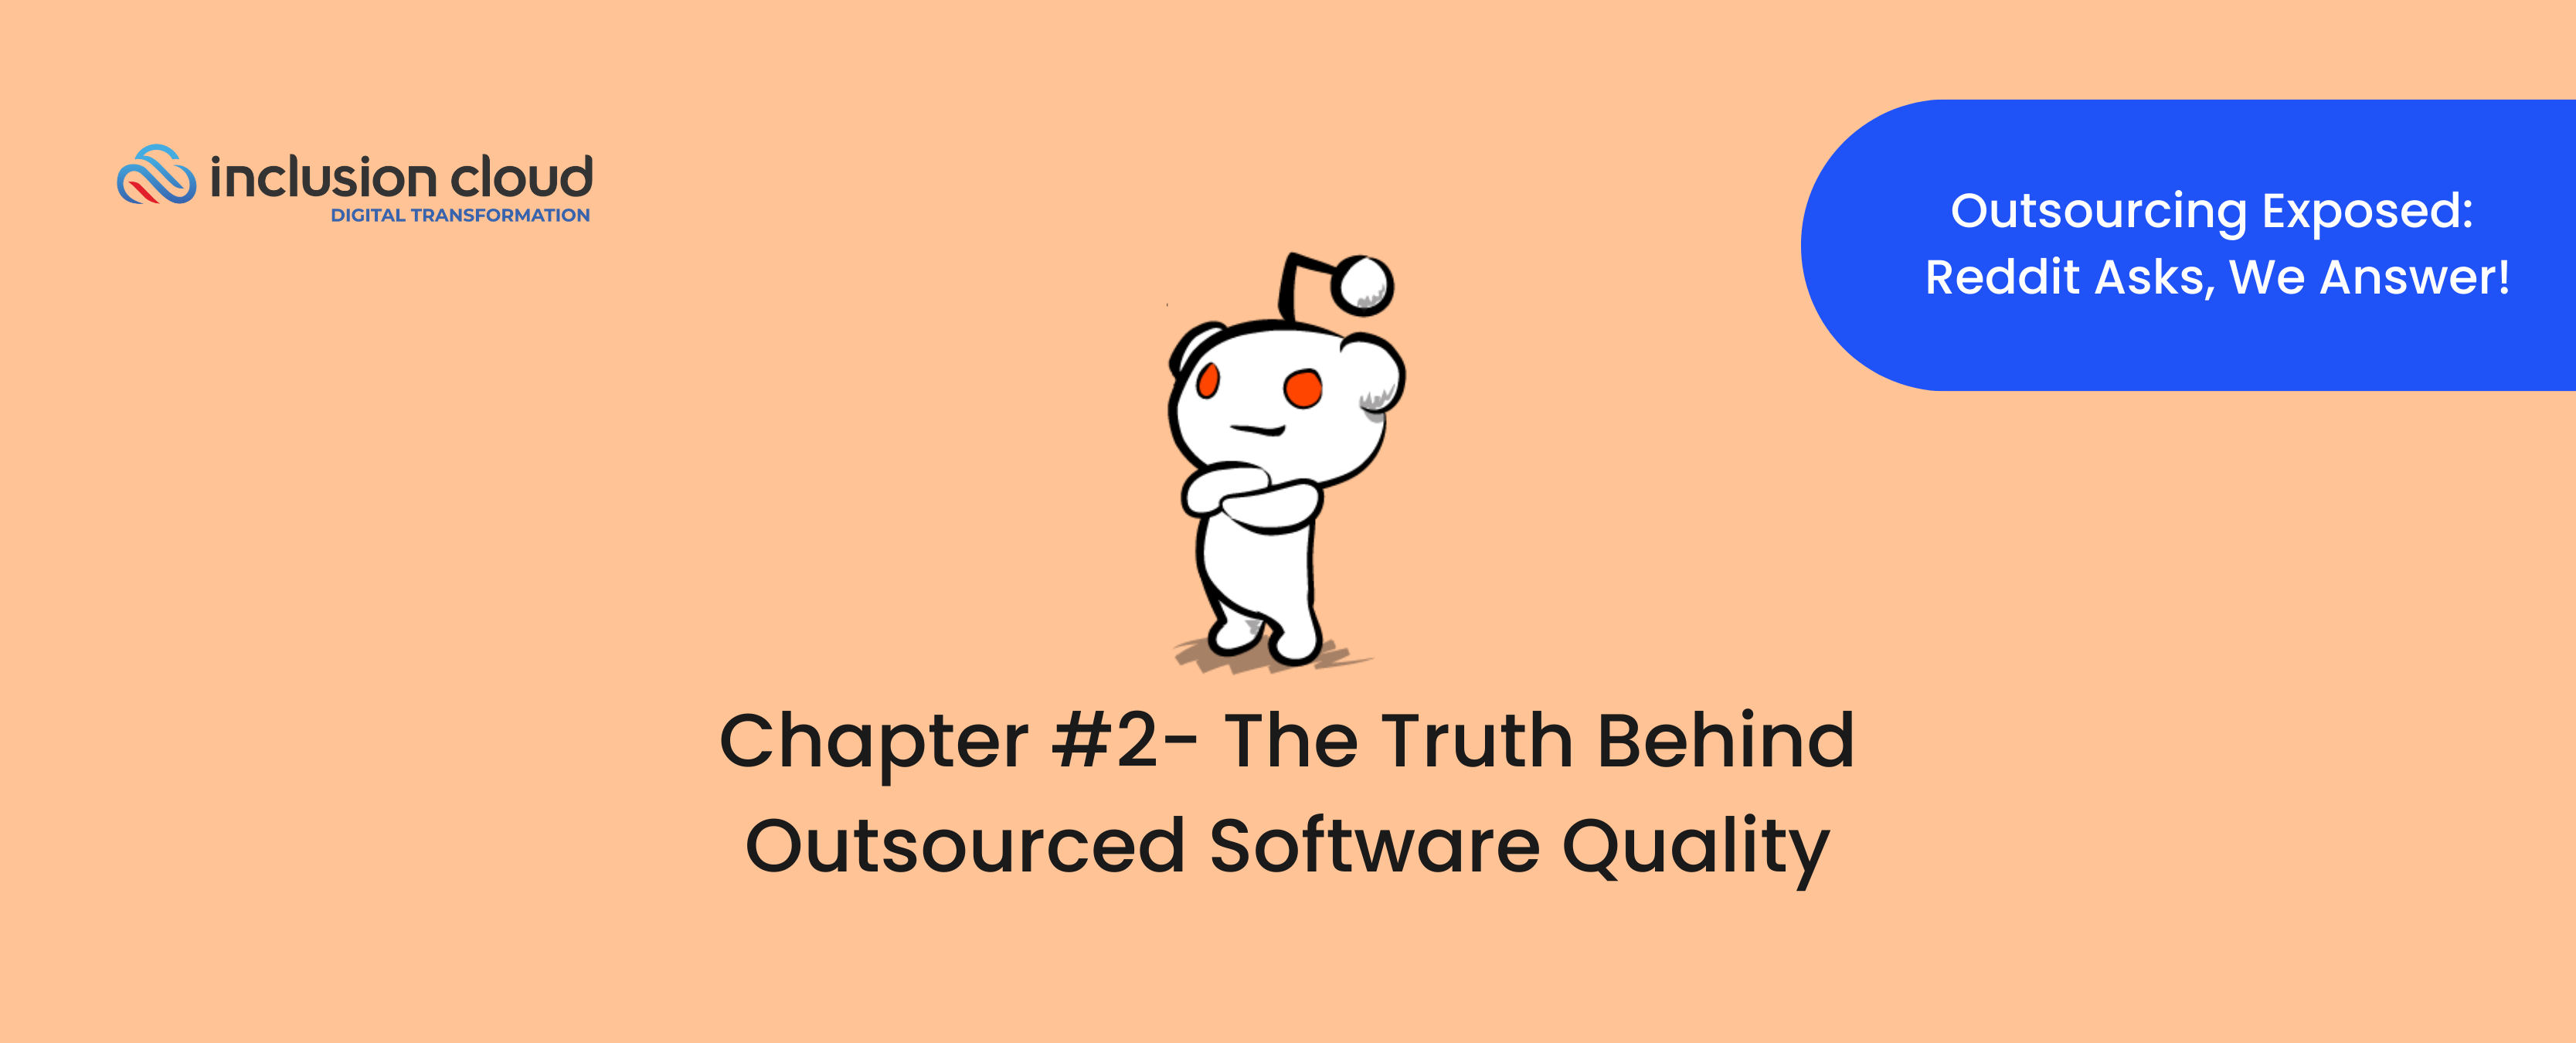 Outsourced software